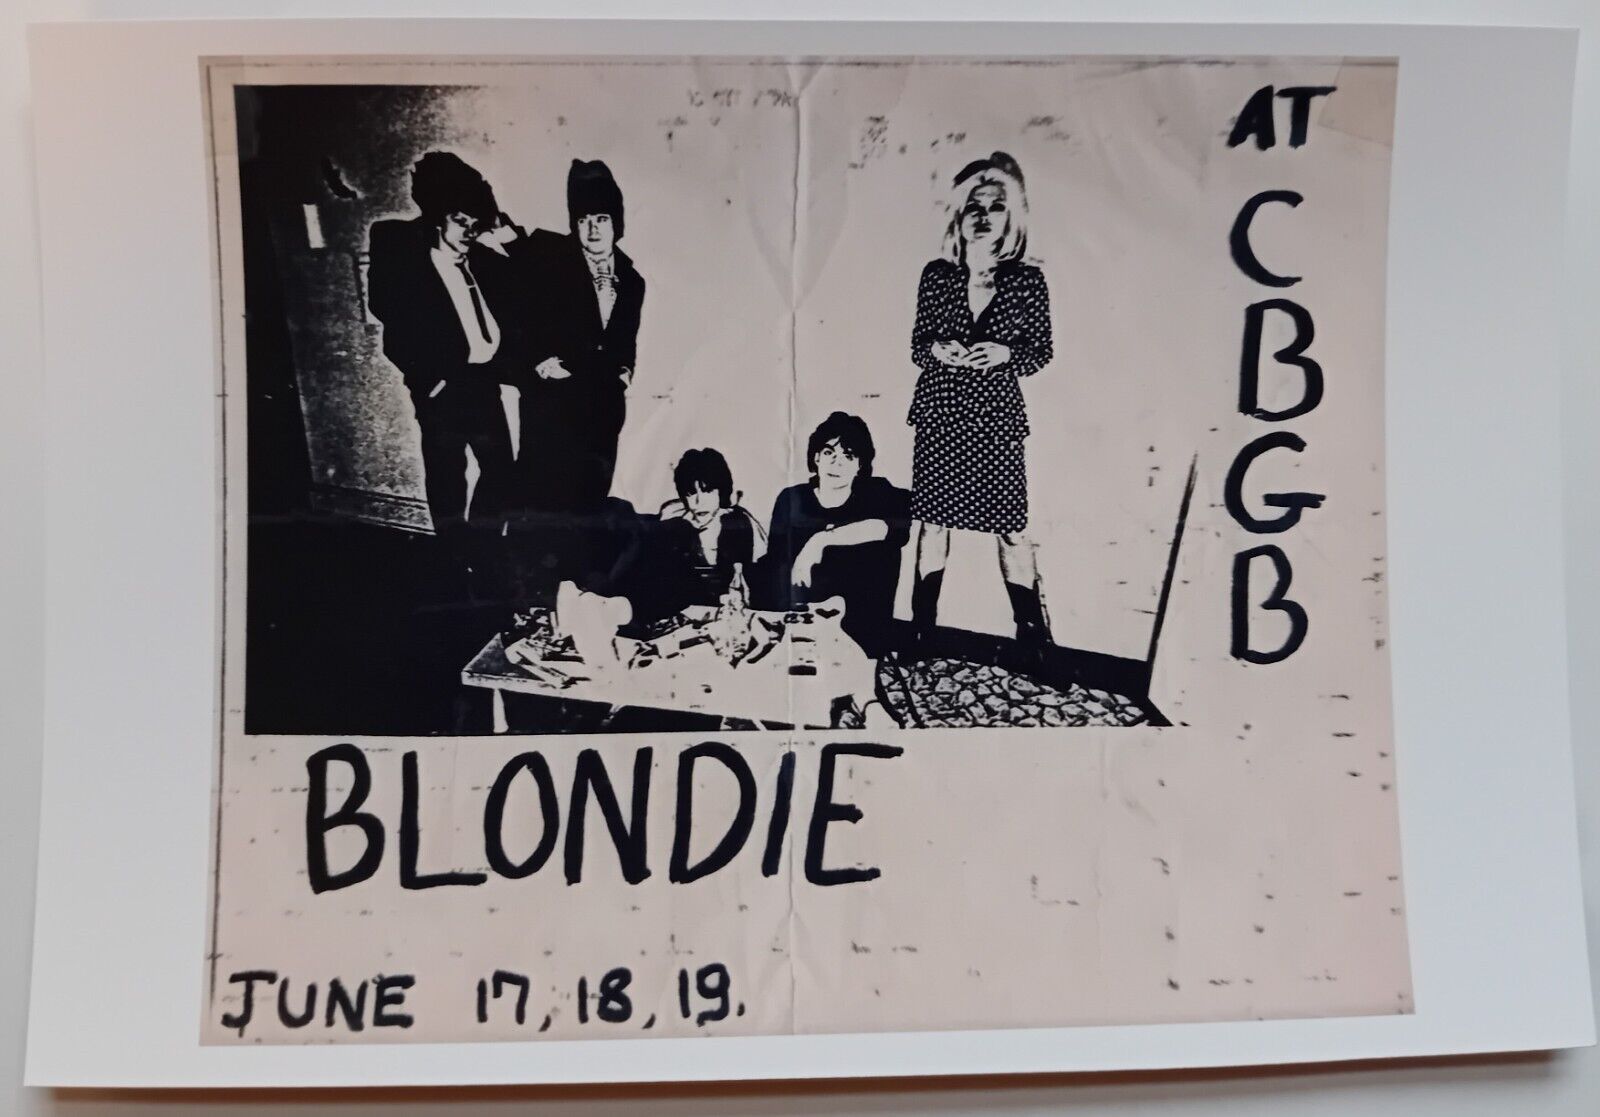 BLONDIE At CBGB June 17, 18, 19 Promotional Poster Postcard Size A6 #3